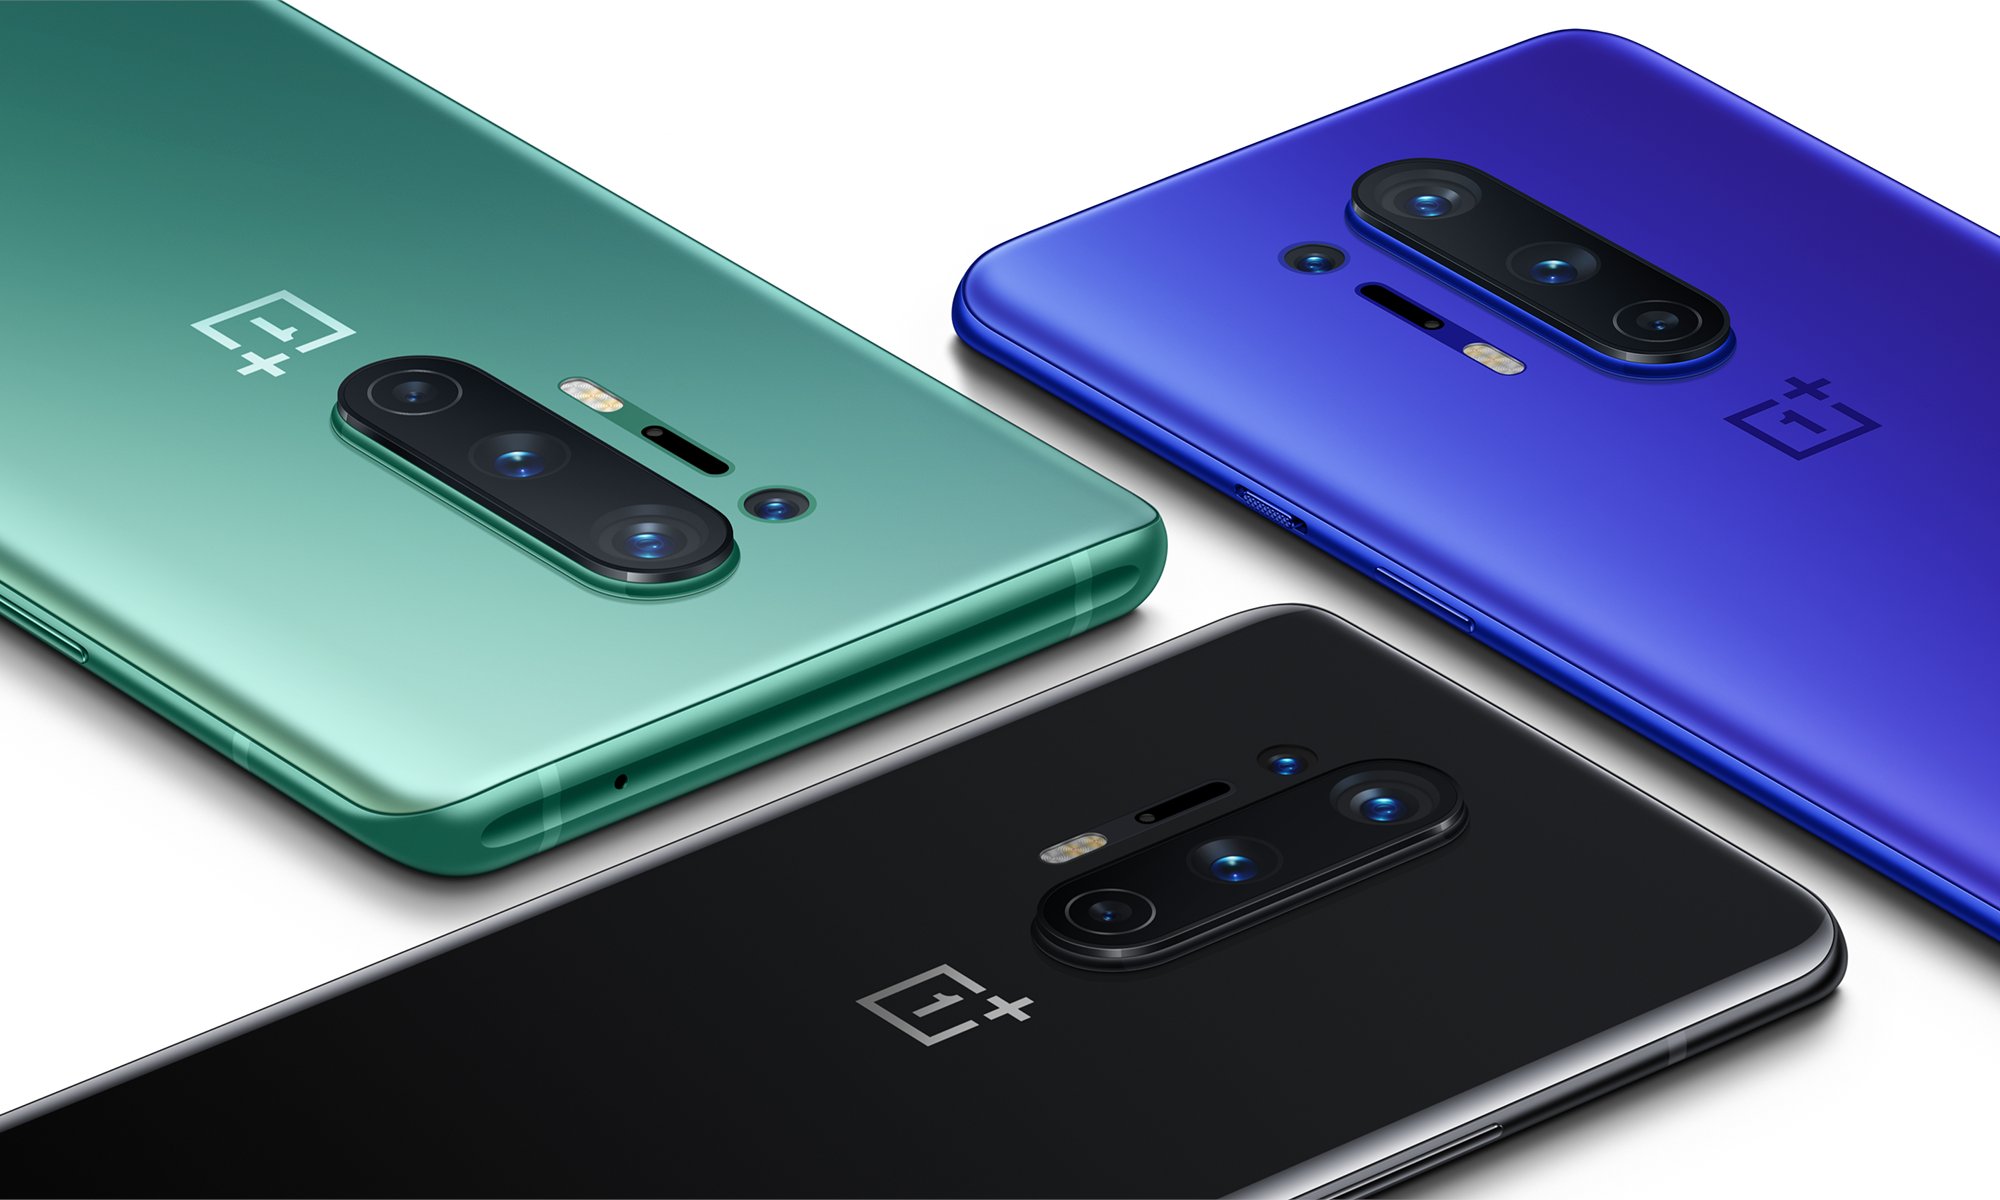 Grab OnePlus 8 and 8 Pro at best price from Giztop via European warehouse